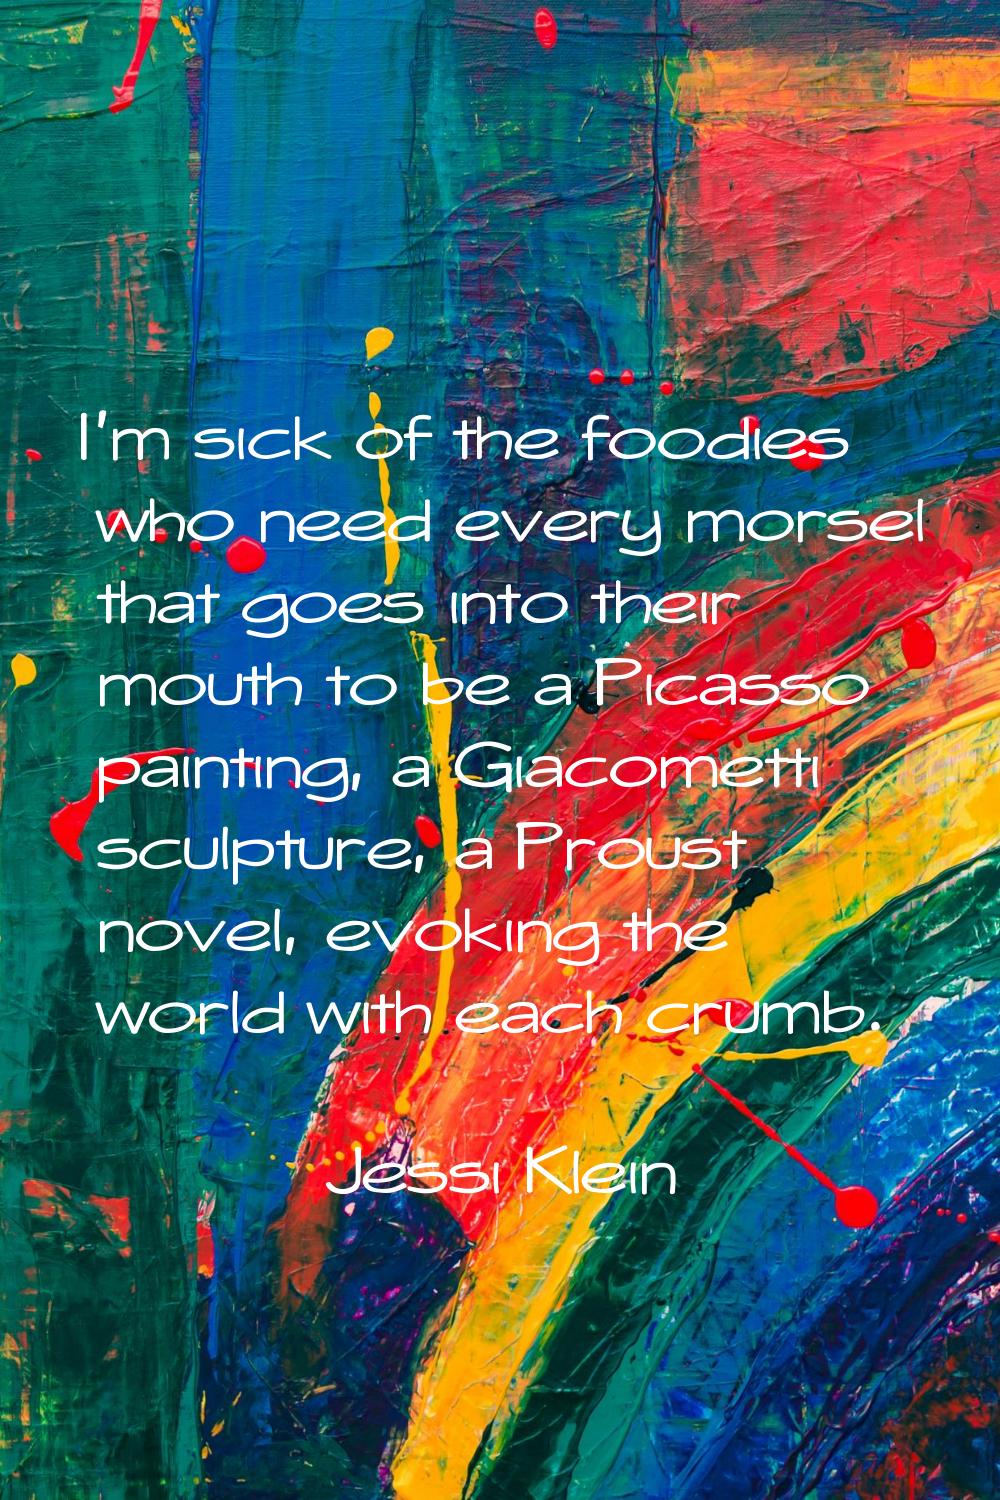 I'm sick of the foodies who need every morsel that goes into their mouth to be a Picasso painting, 